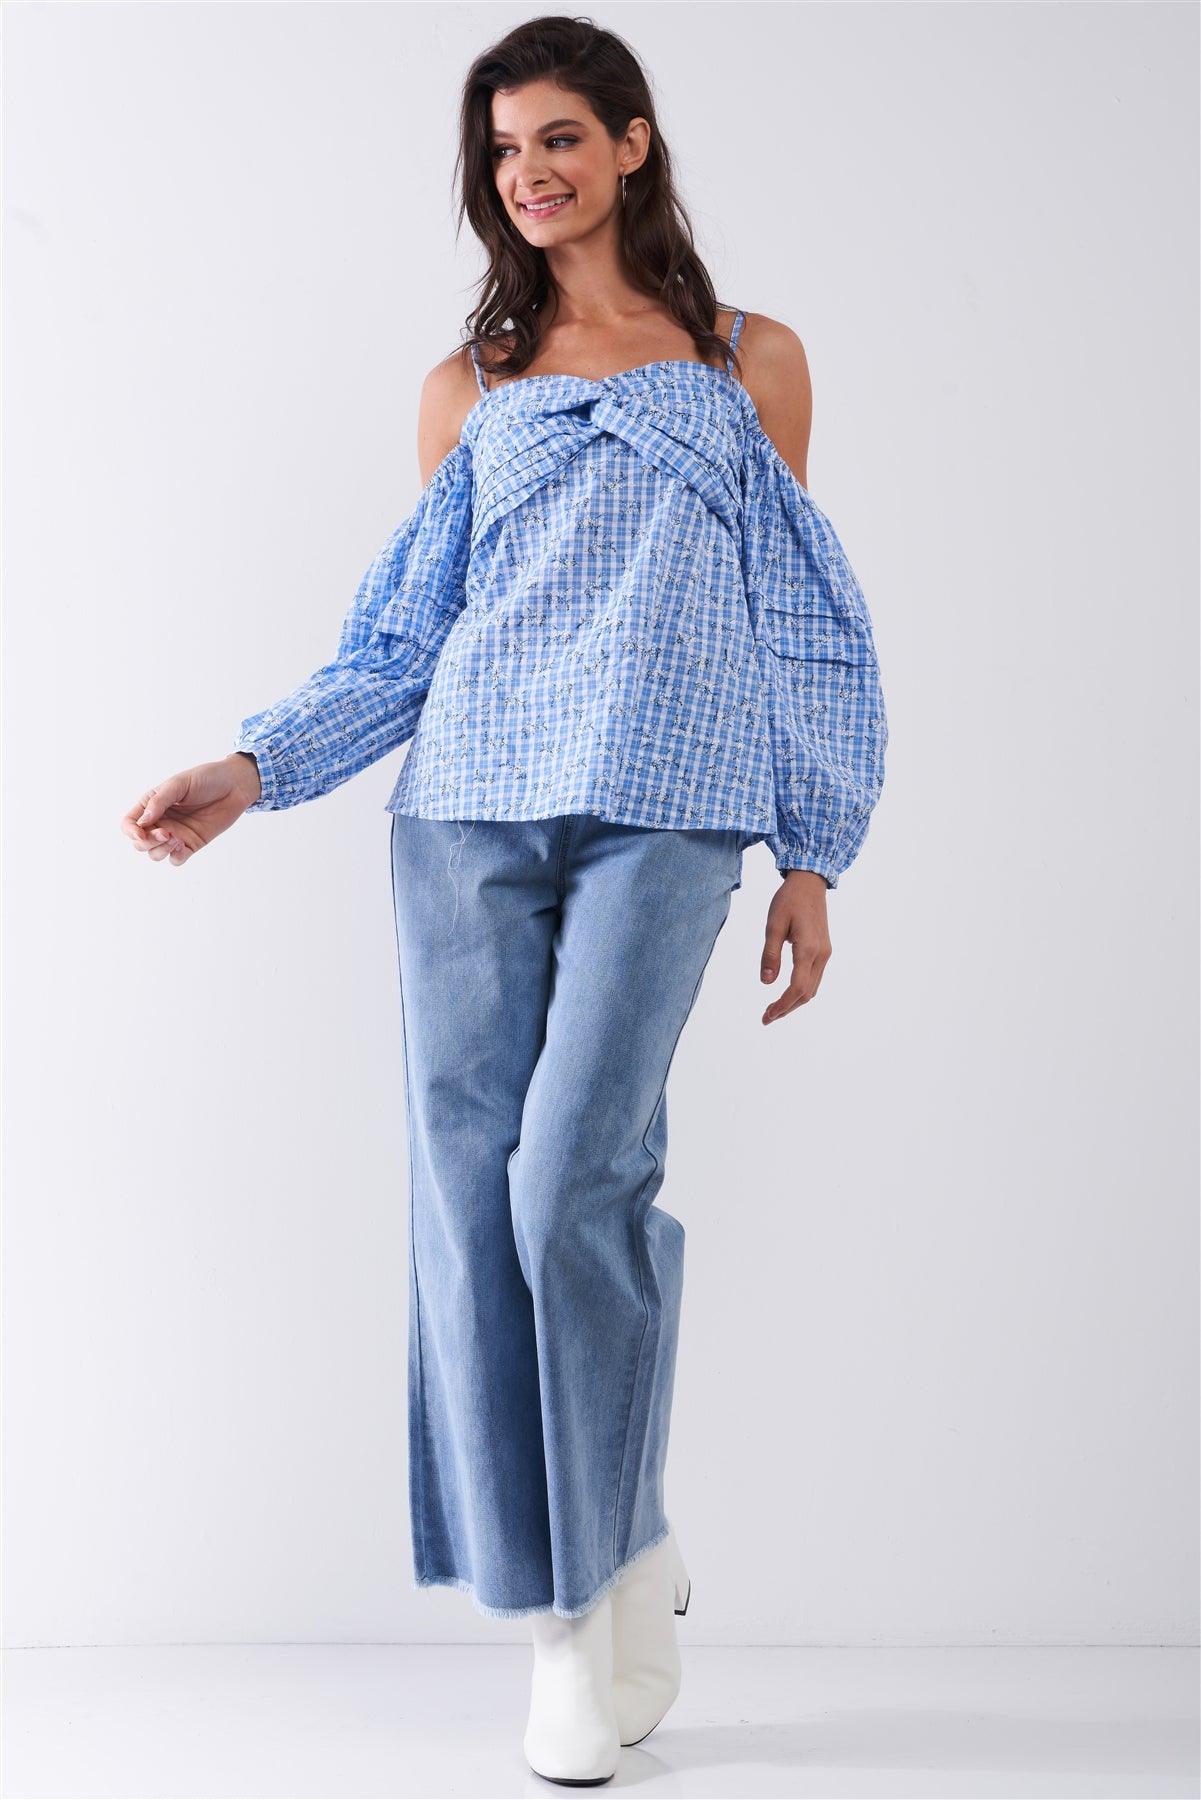 Blue & White Checkered Floral Print Off-The-Shoulder Balloon Sleeve Relaxed Blouse